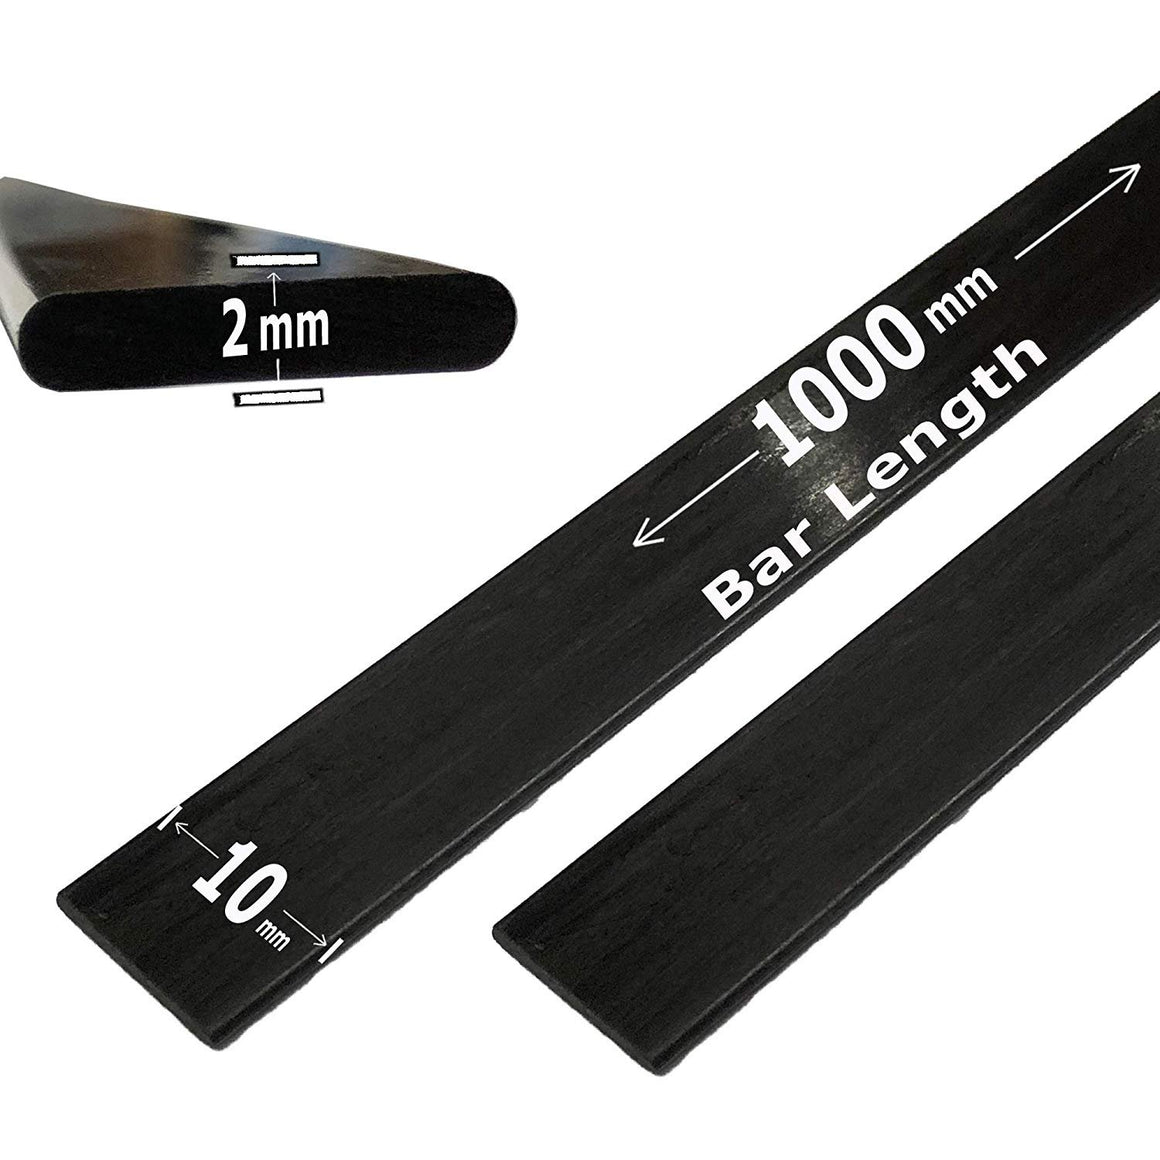 (1) 2mm x 10mm 1000mm - PULTRUDED-Flat Carbon Fiber Bar. 100% Pultruded high Strength Carbon Fiber. Used for Drones, Radio Controlled Vehicles. Projects requiring high Strength Components